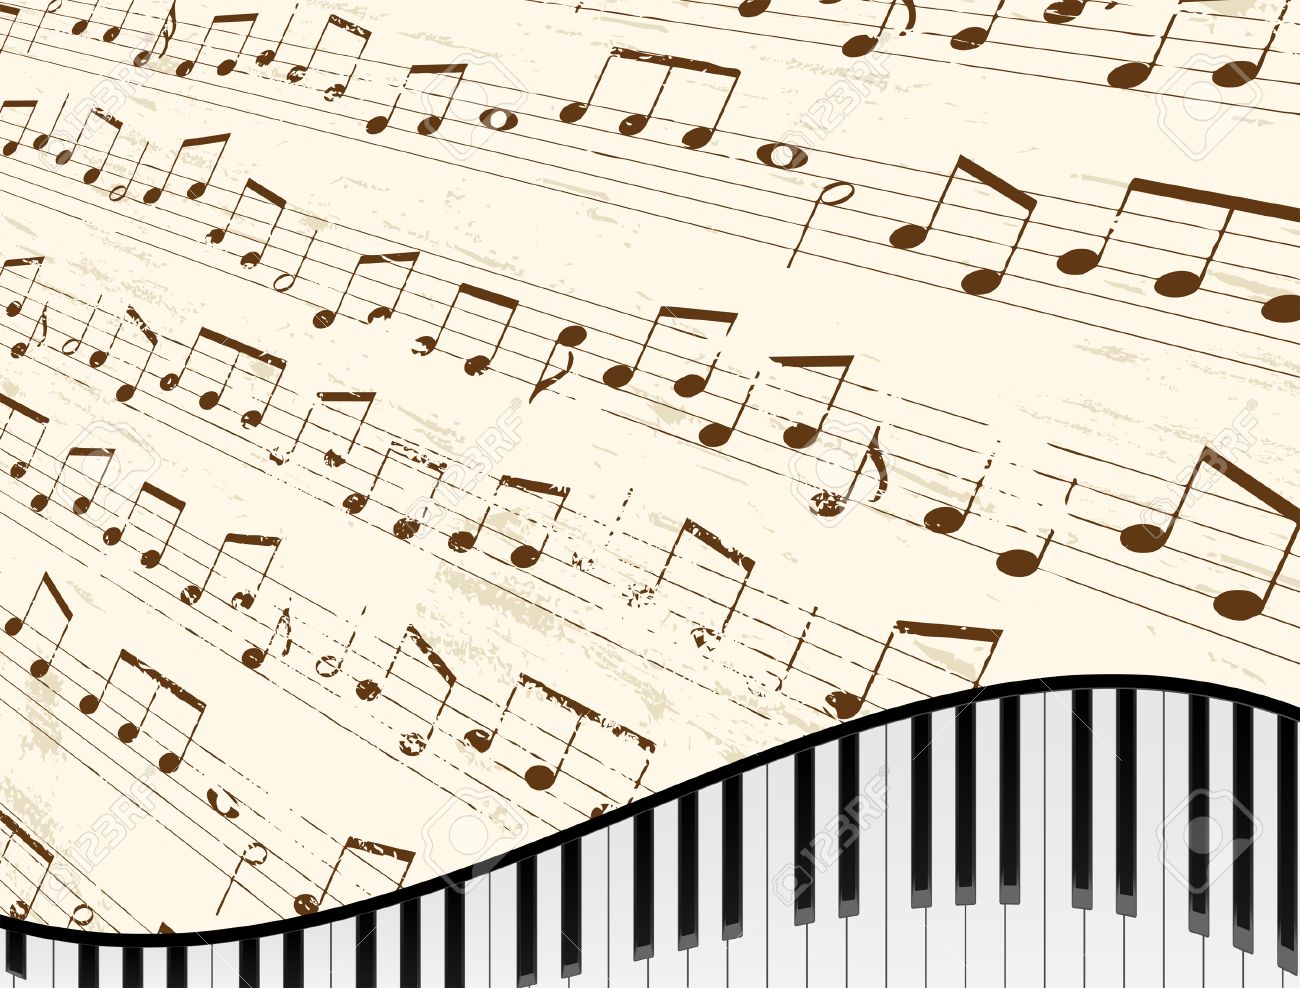 Piano Keyboard Against Faded Music Sheet Background Royalty